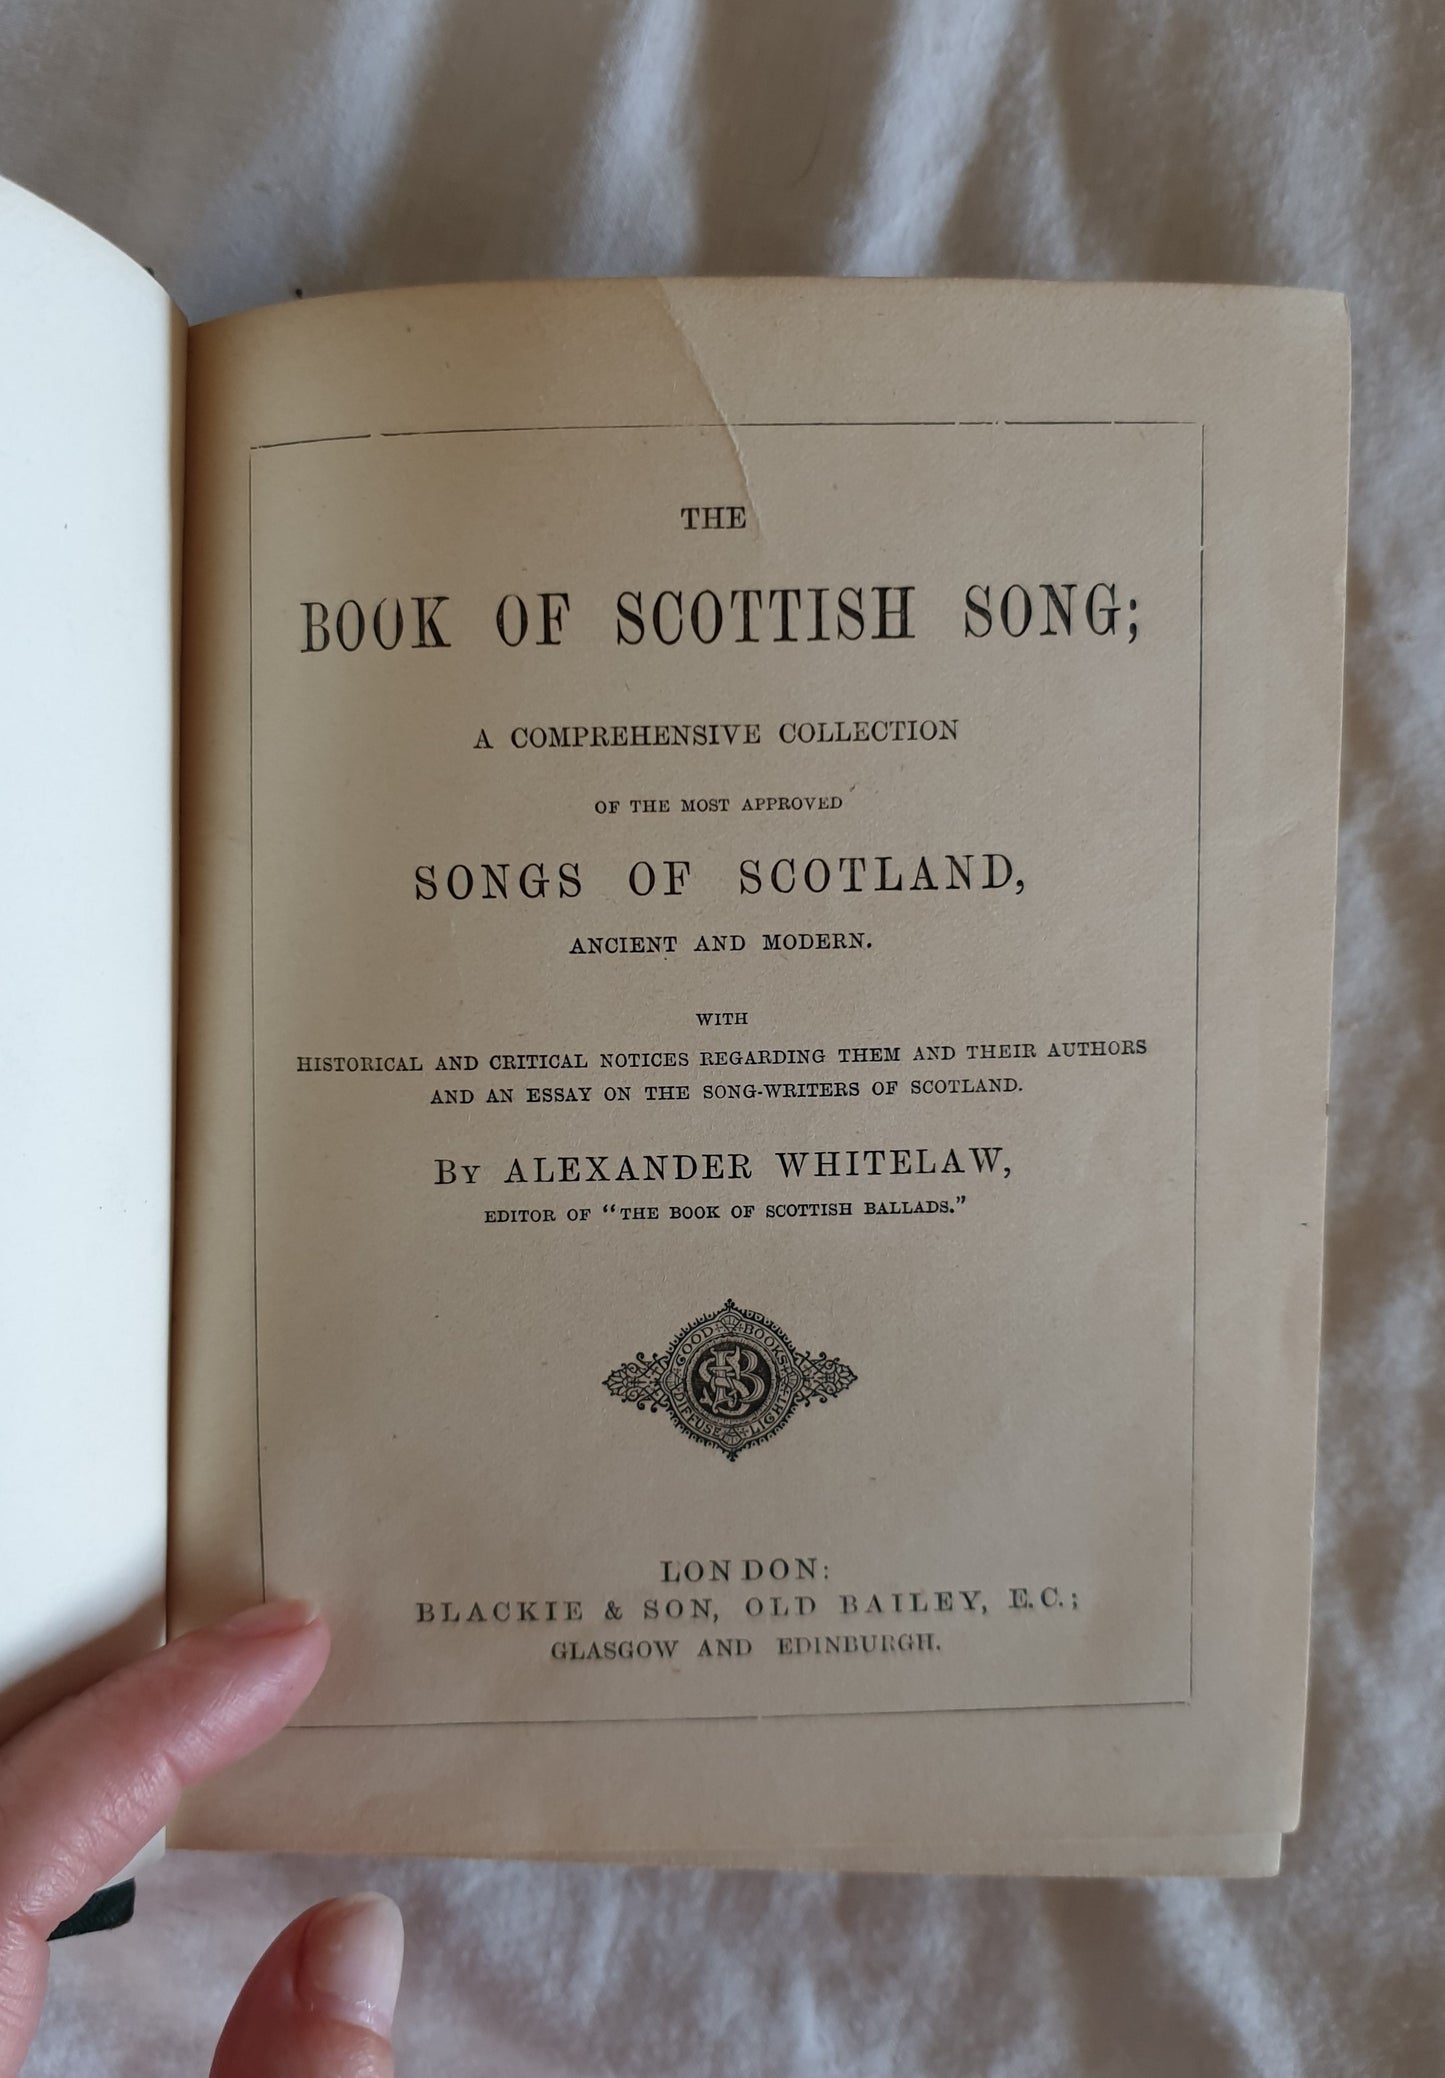 The Book of Scottish Song by Alexander Whitelaw